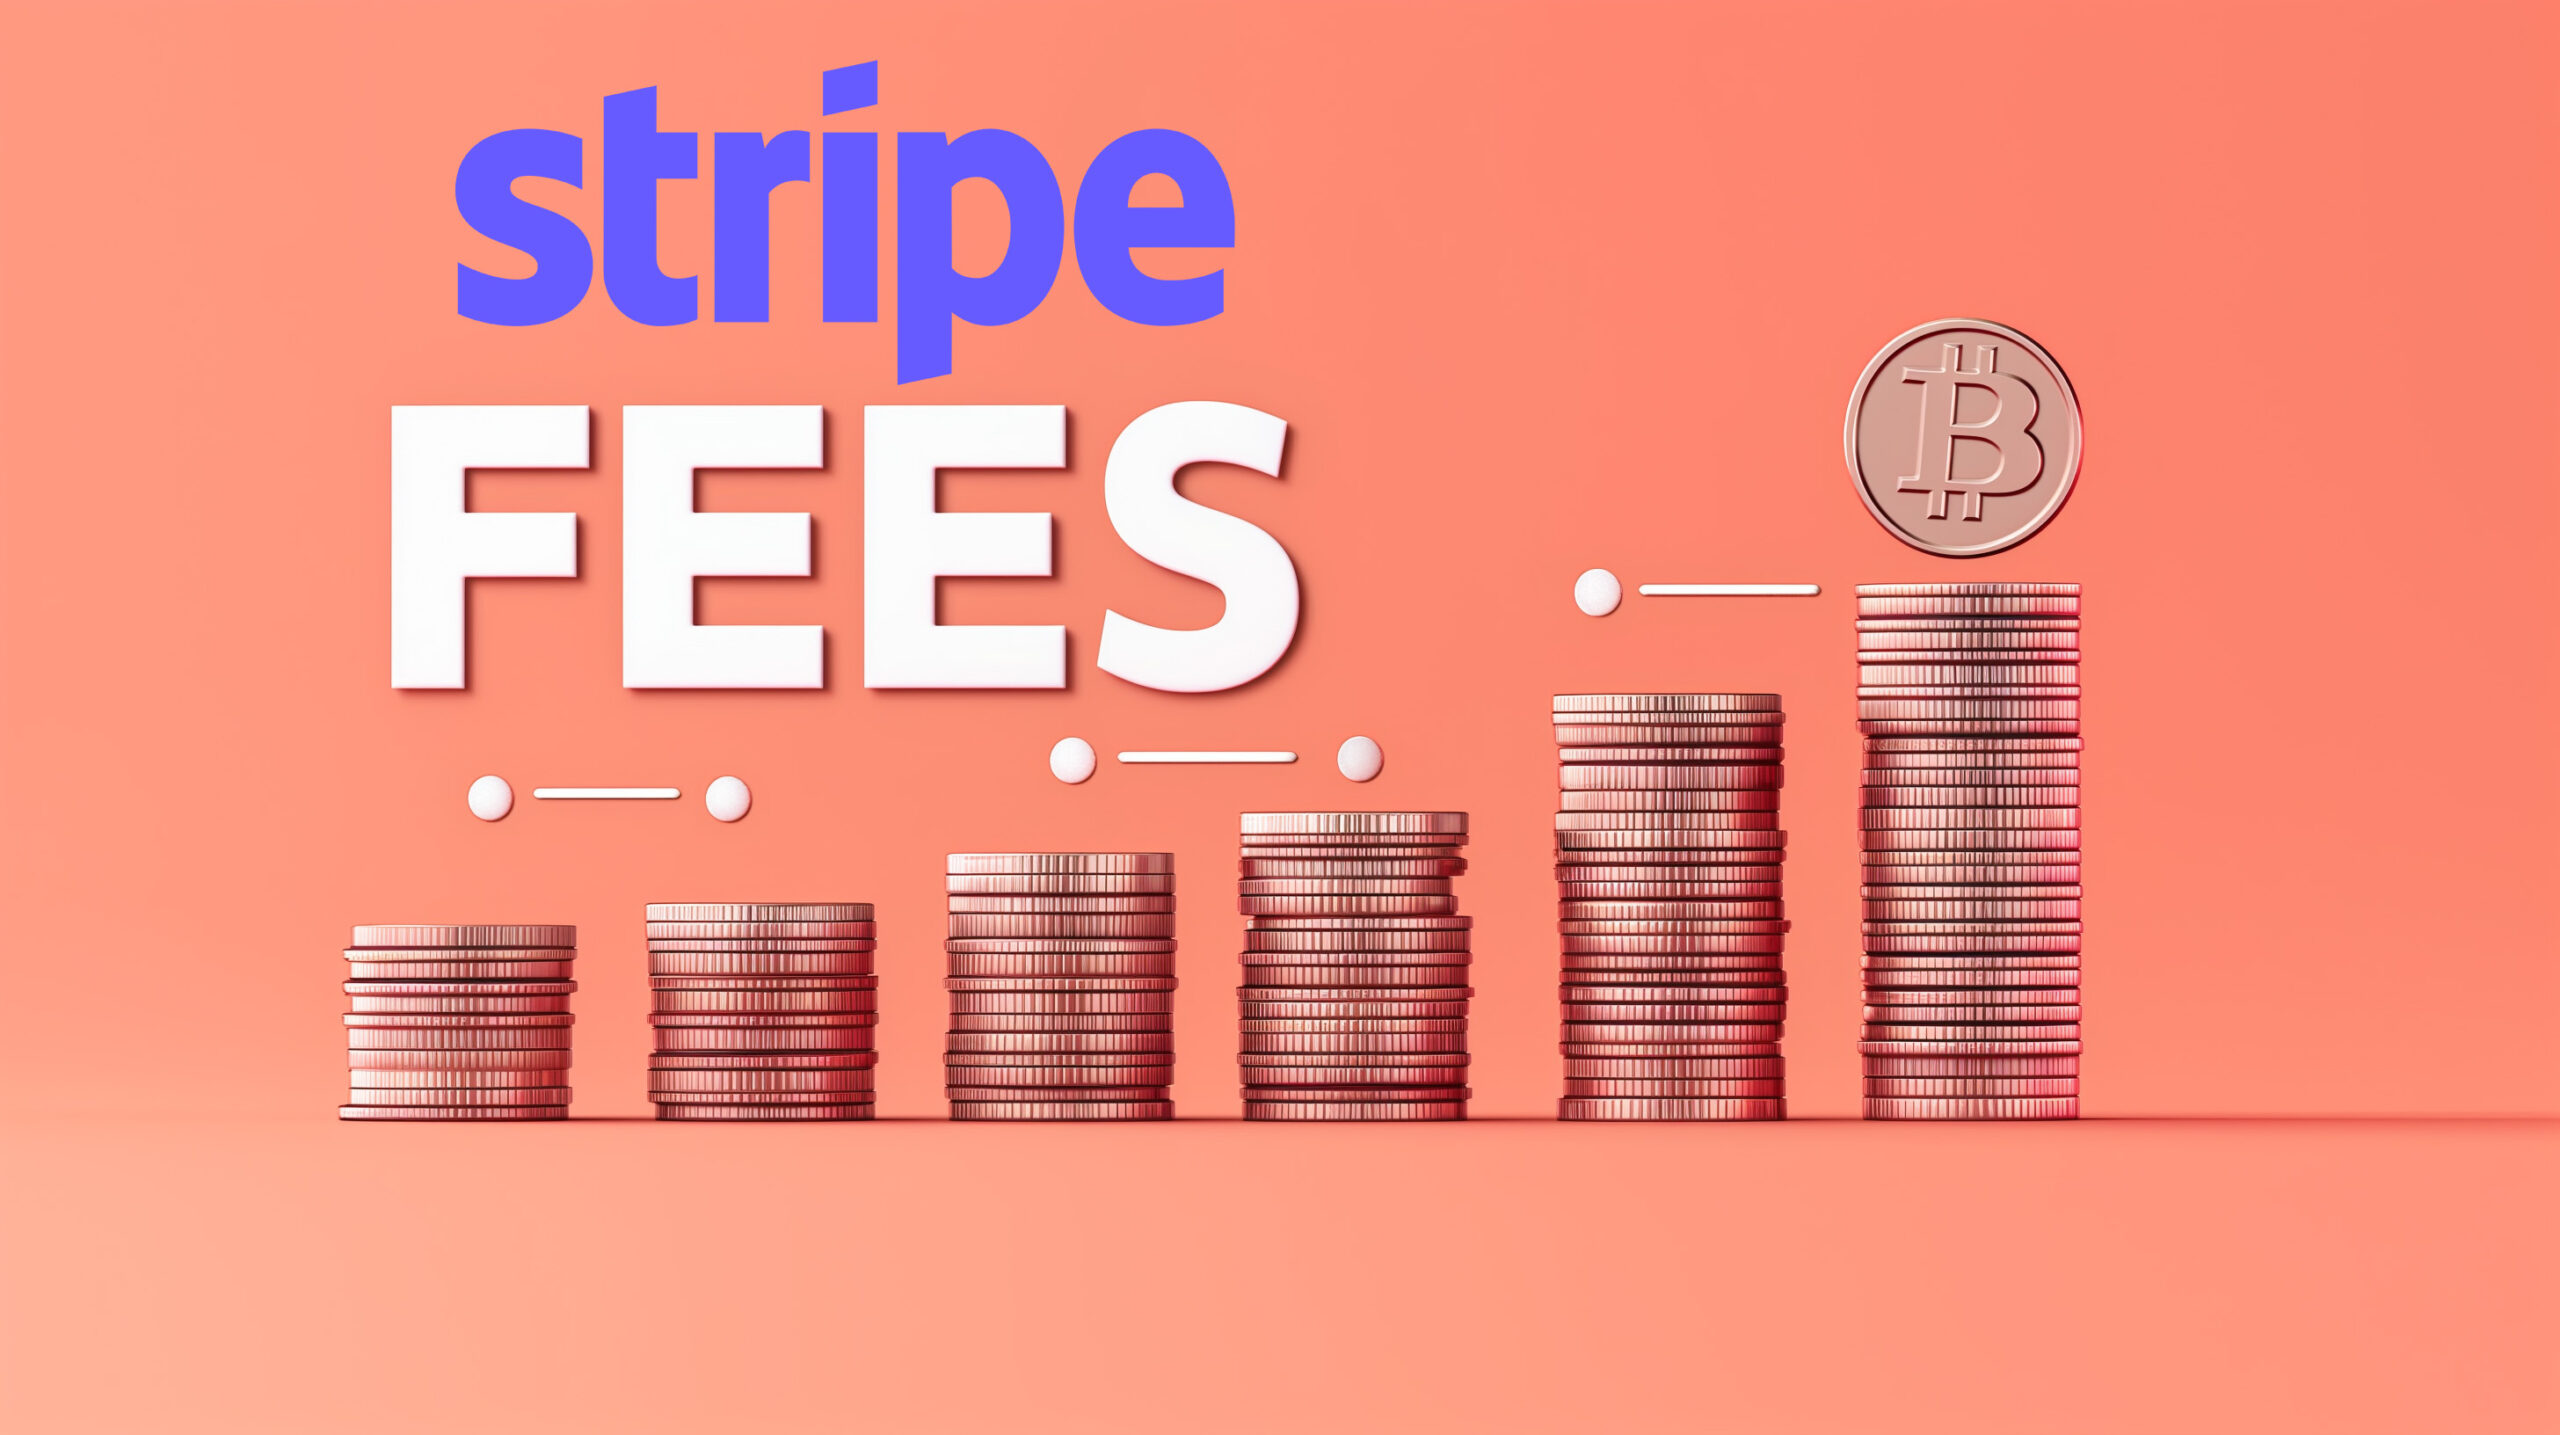 stripe fees written above a stack of growing coins